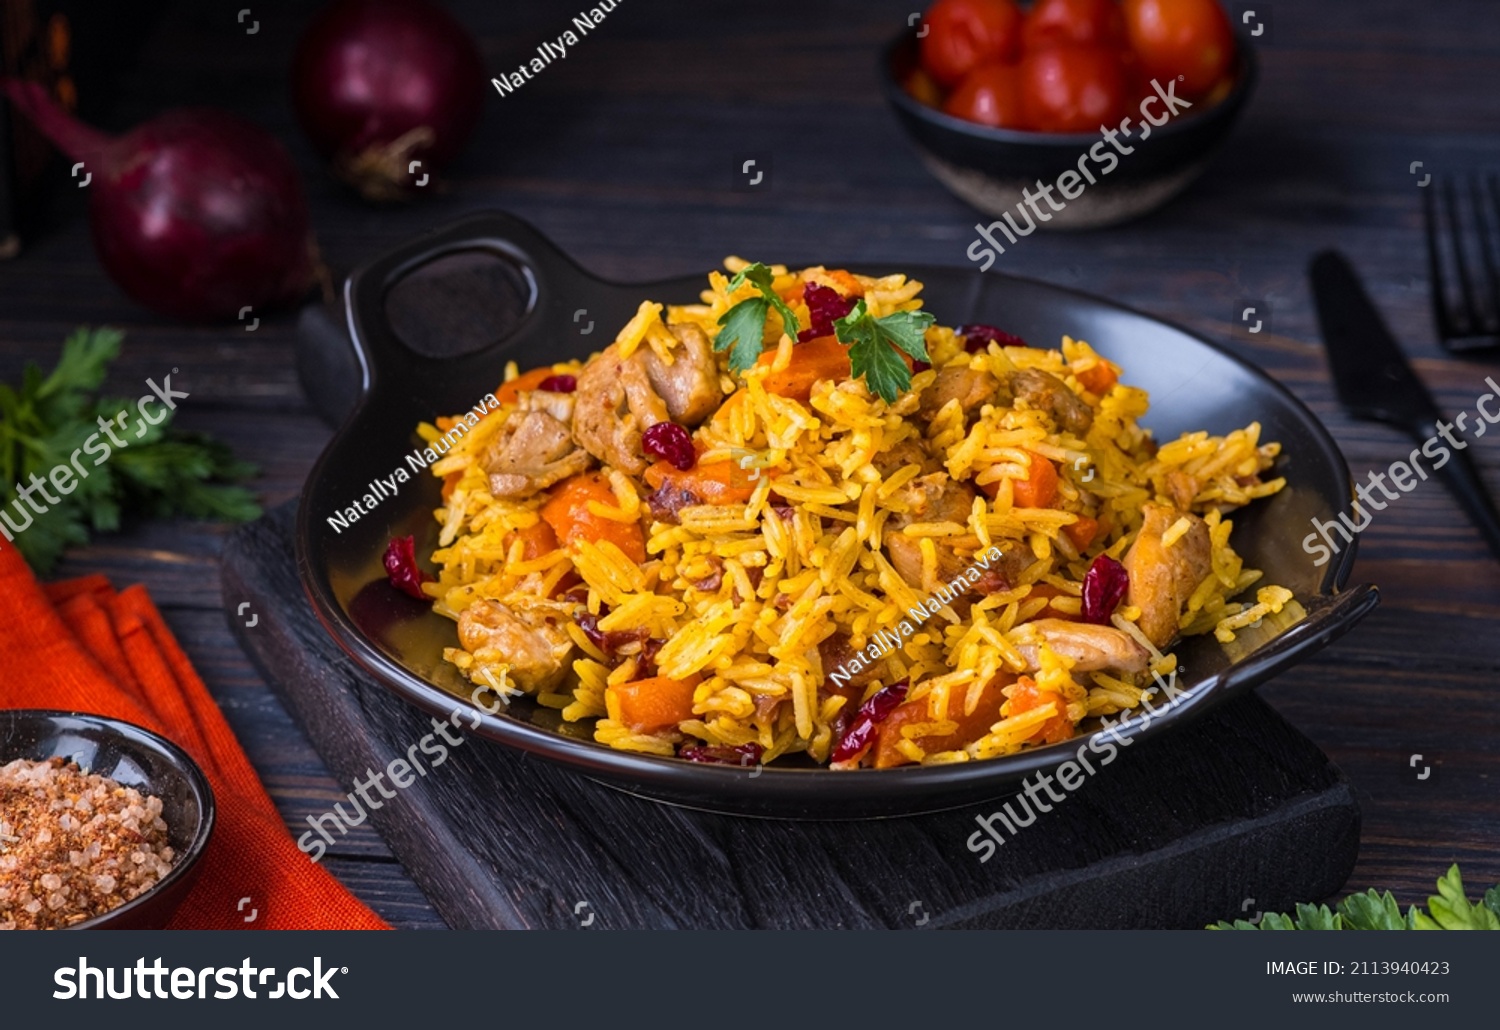 Pilaf, a dish of rice, chicken, carrots with spices and dried cranberries on a black plate on a dark wooden background. Eastern cuisine. #2113940423